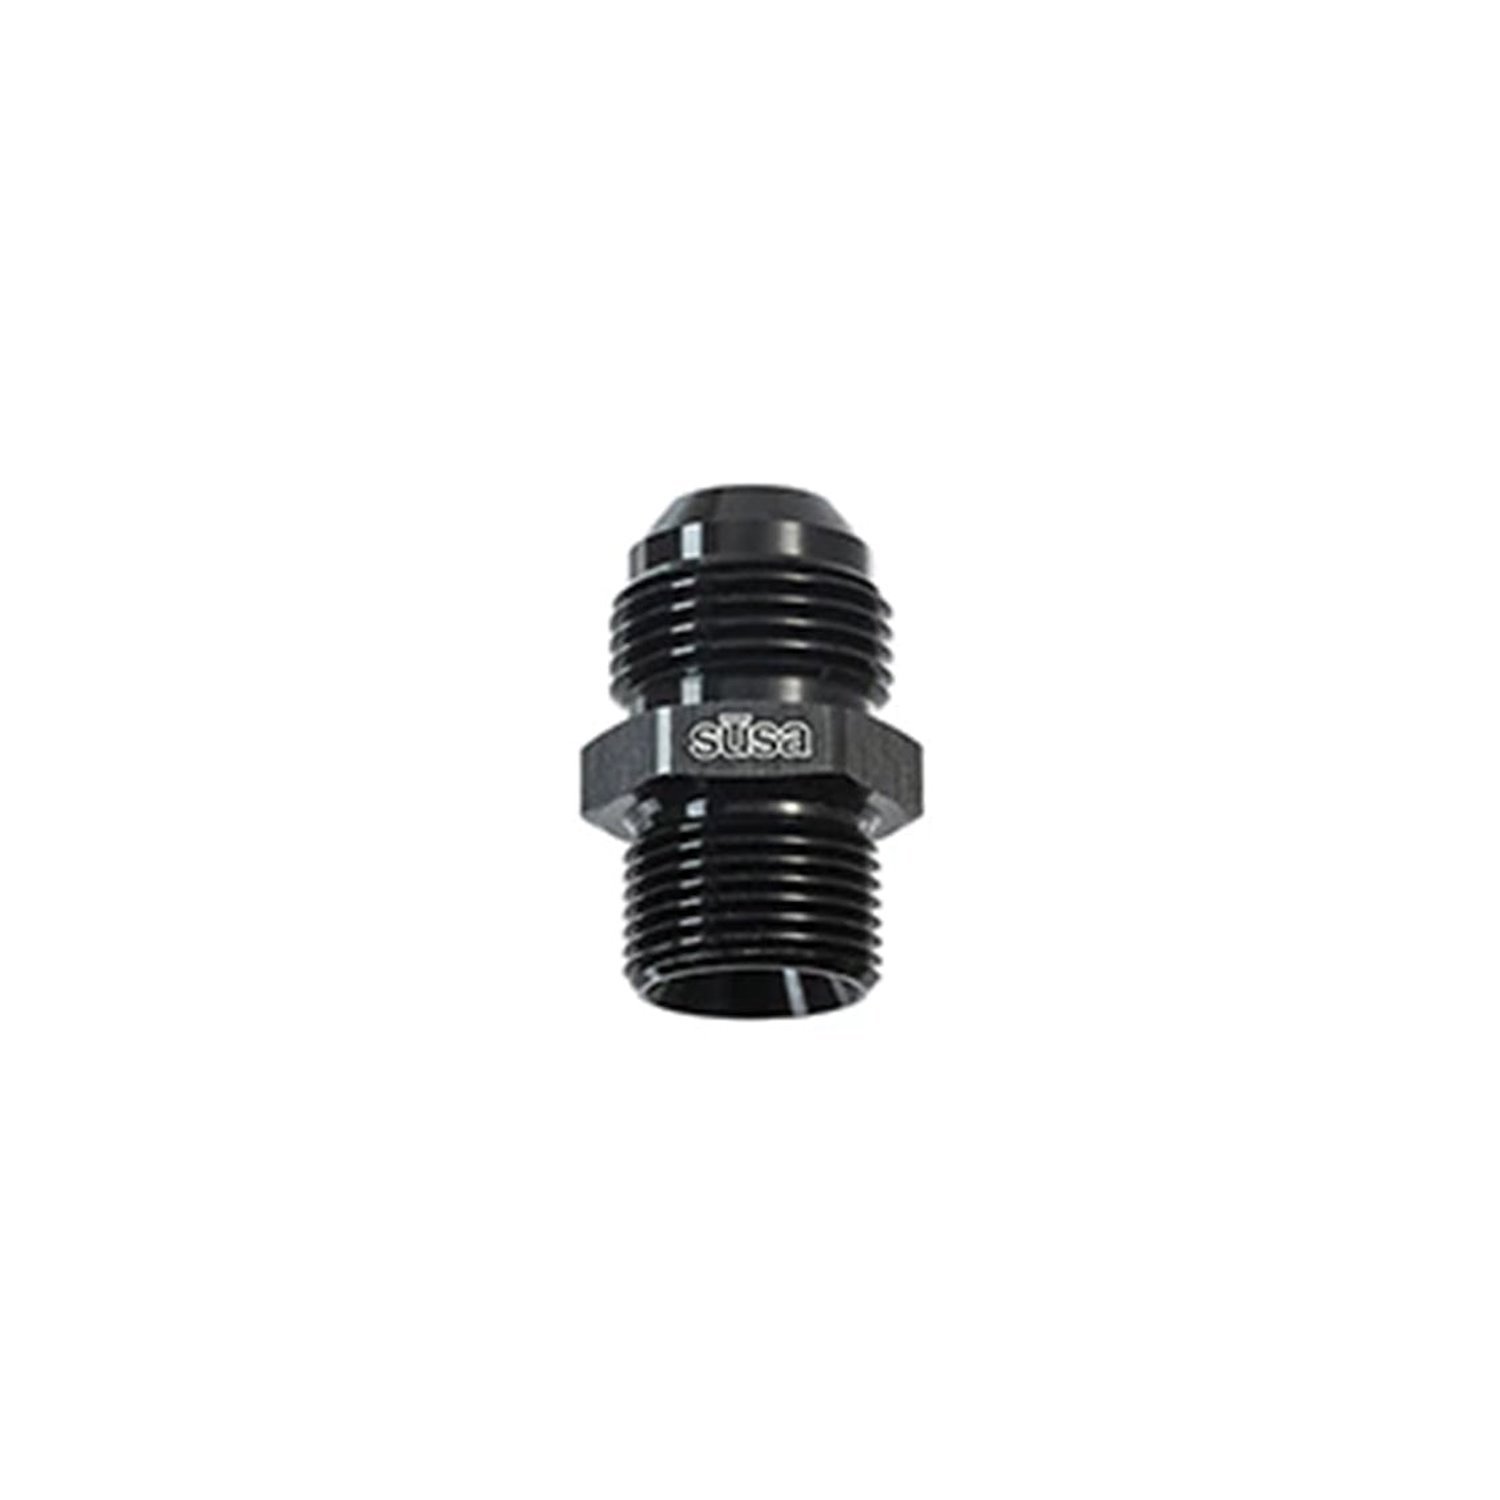 22-M14AN06-00 Adapter Fitting, M14 Male to AN06 Male, Straight